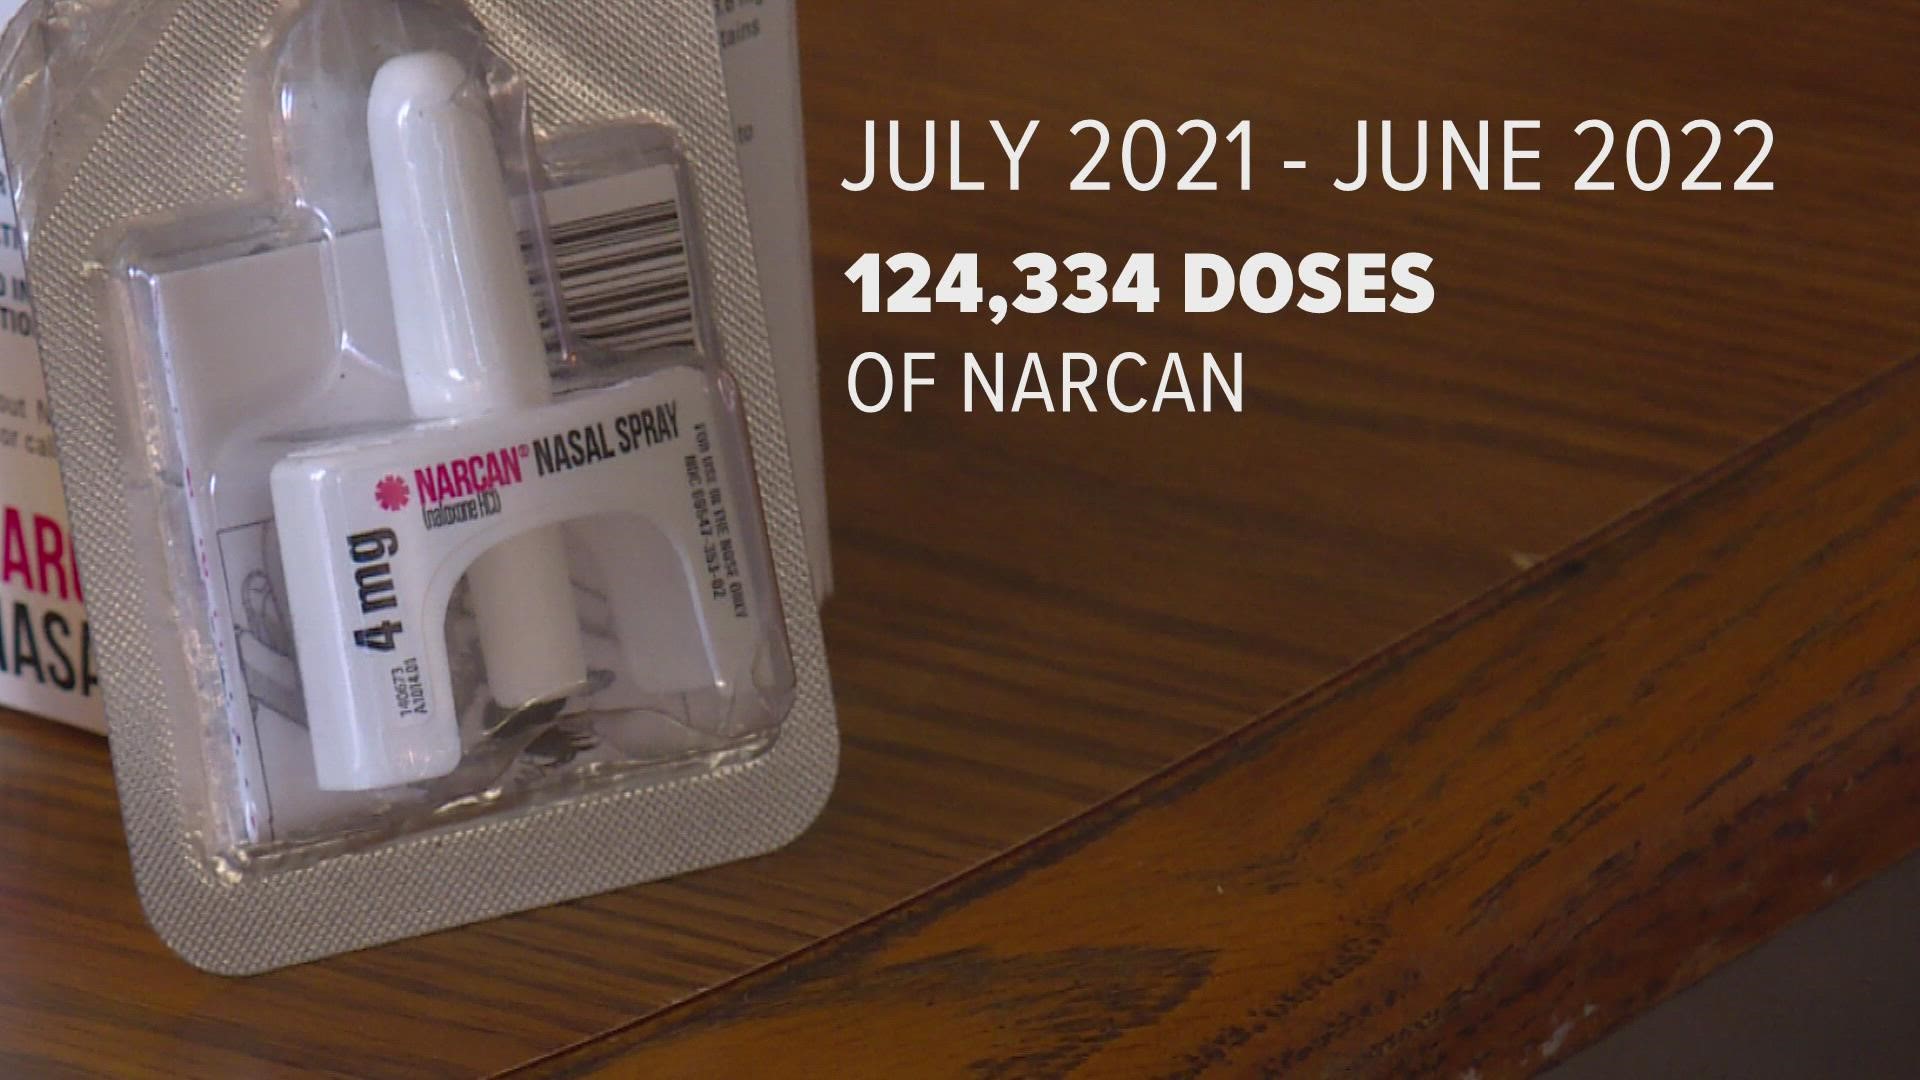 9NEWS Reporter Marc Sallinger shows us the amount of Narcan available in communities is skyrocketing.